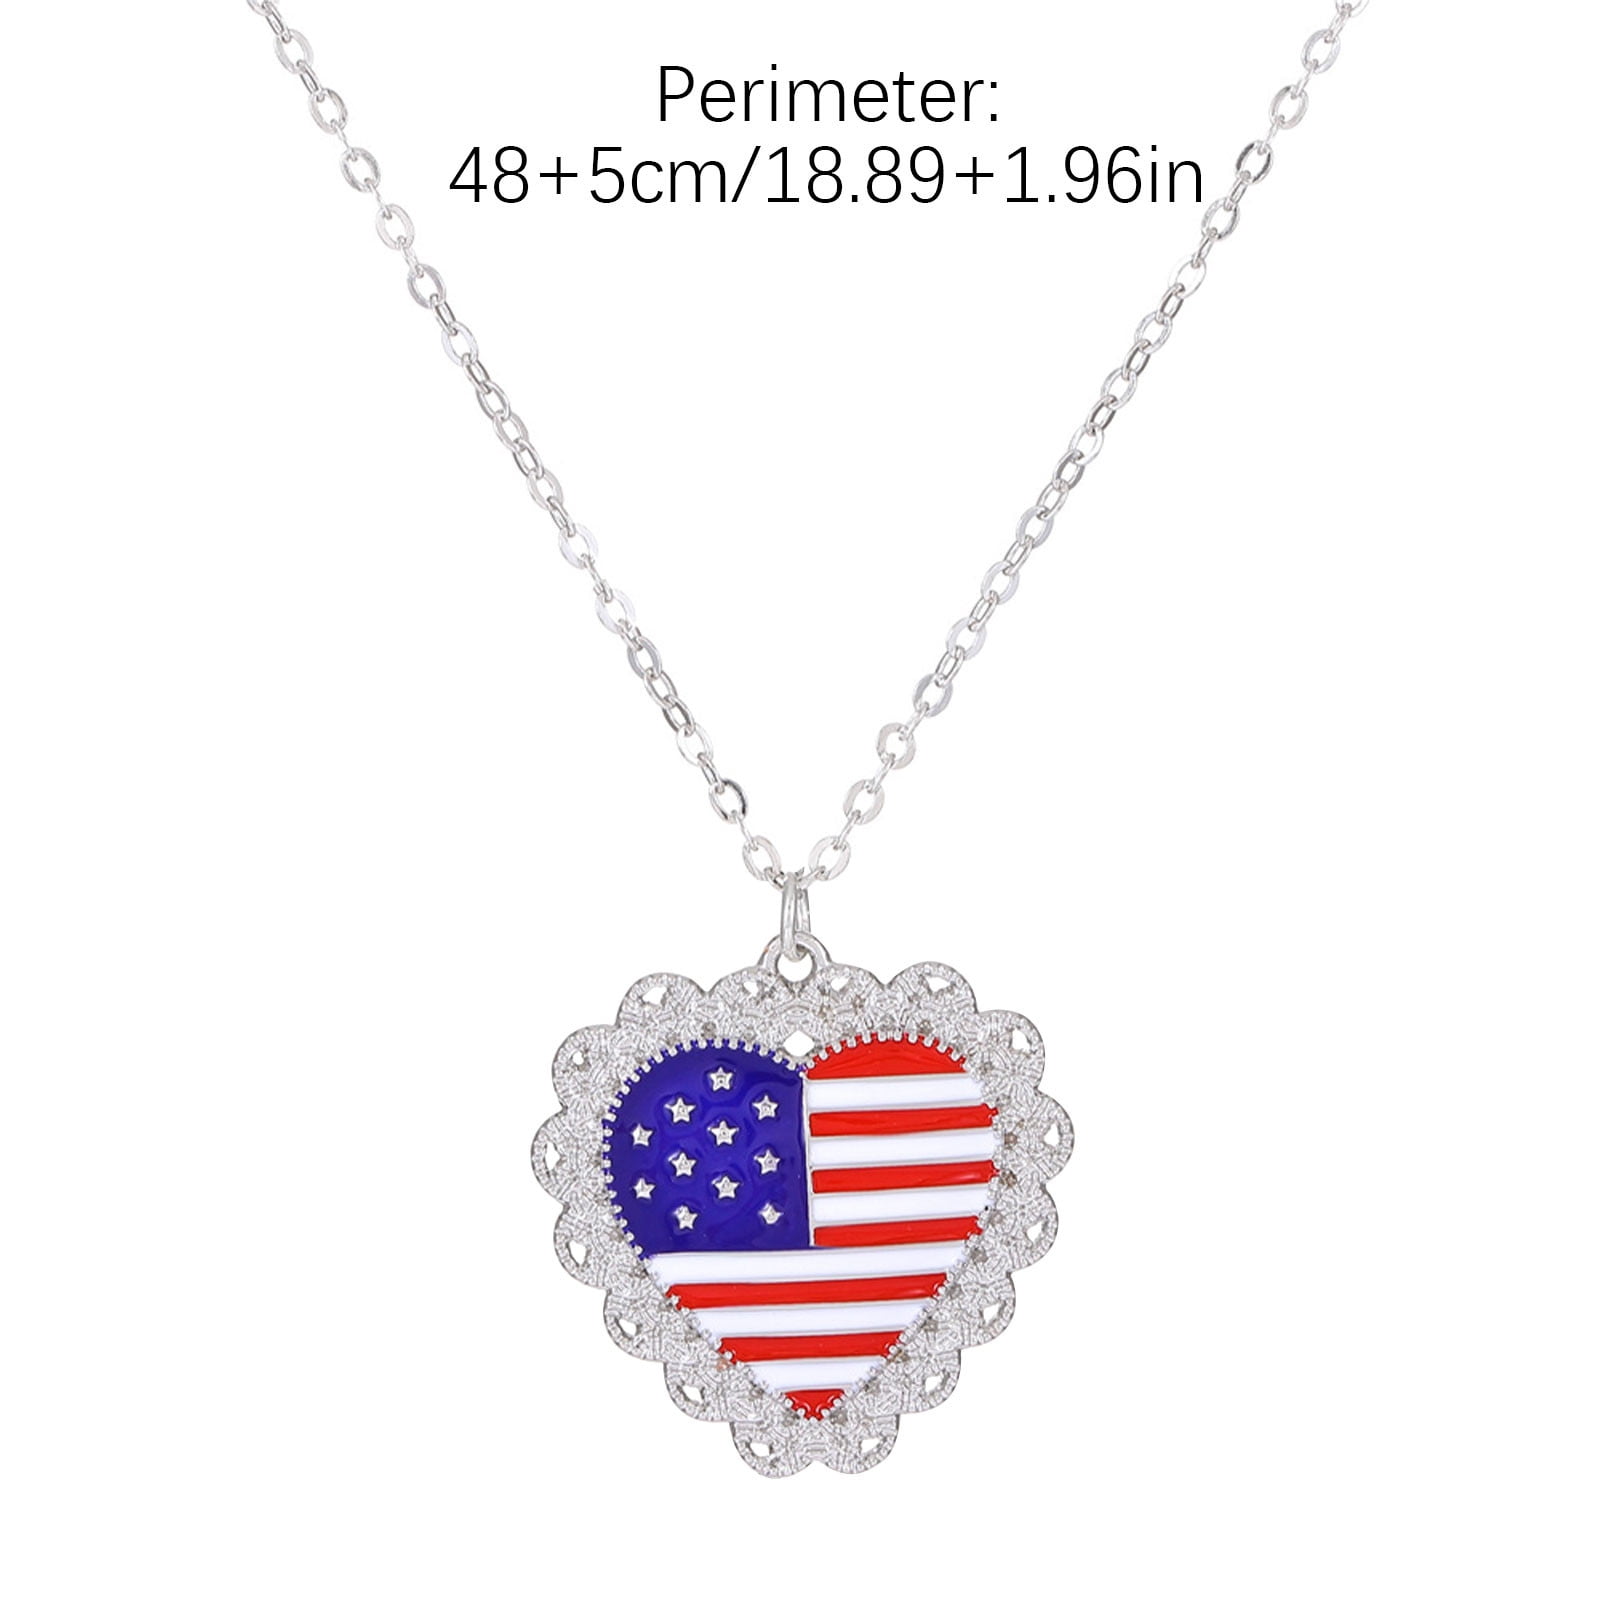 PNG wishes you and your family a beautiful 4th of July. #PNGJewelers  #IndependenceDay #4thJuly | Jewels, 4th of july, Pendant